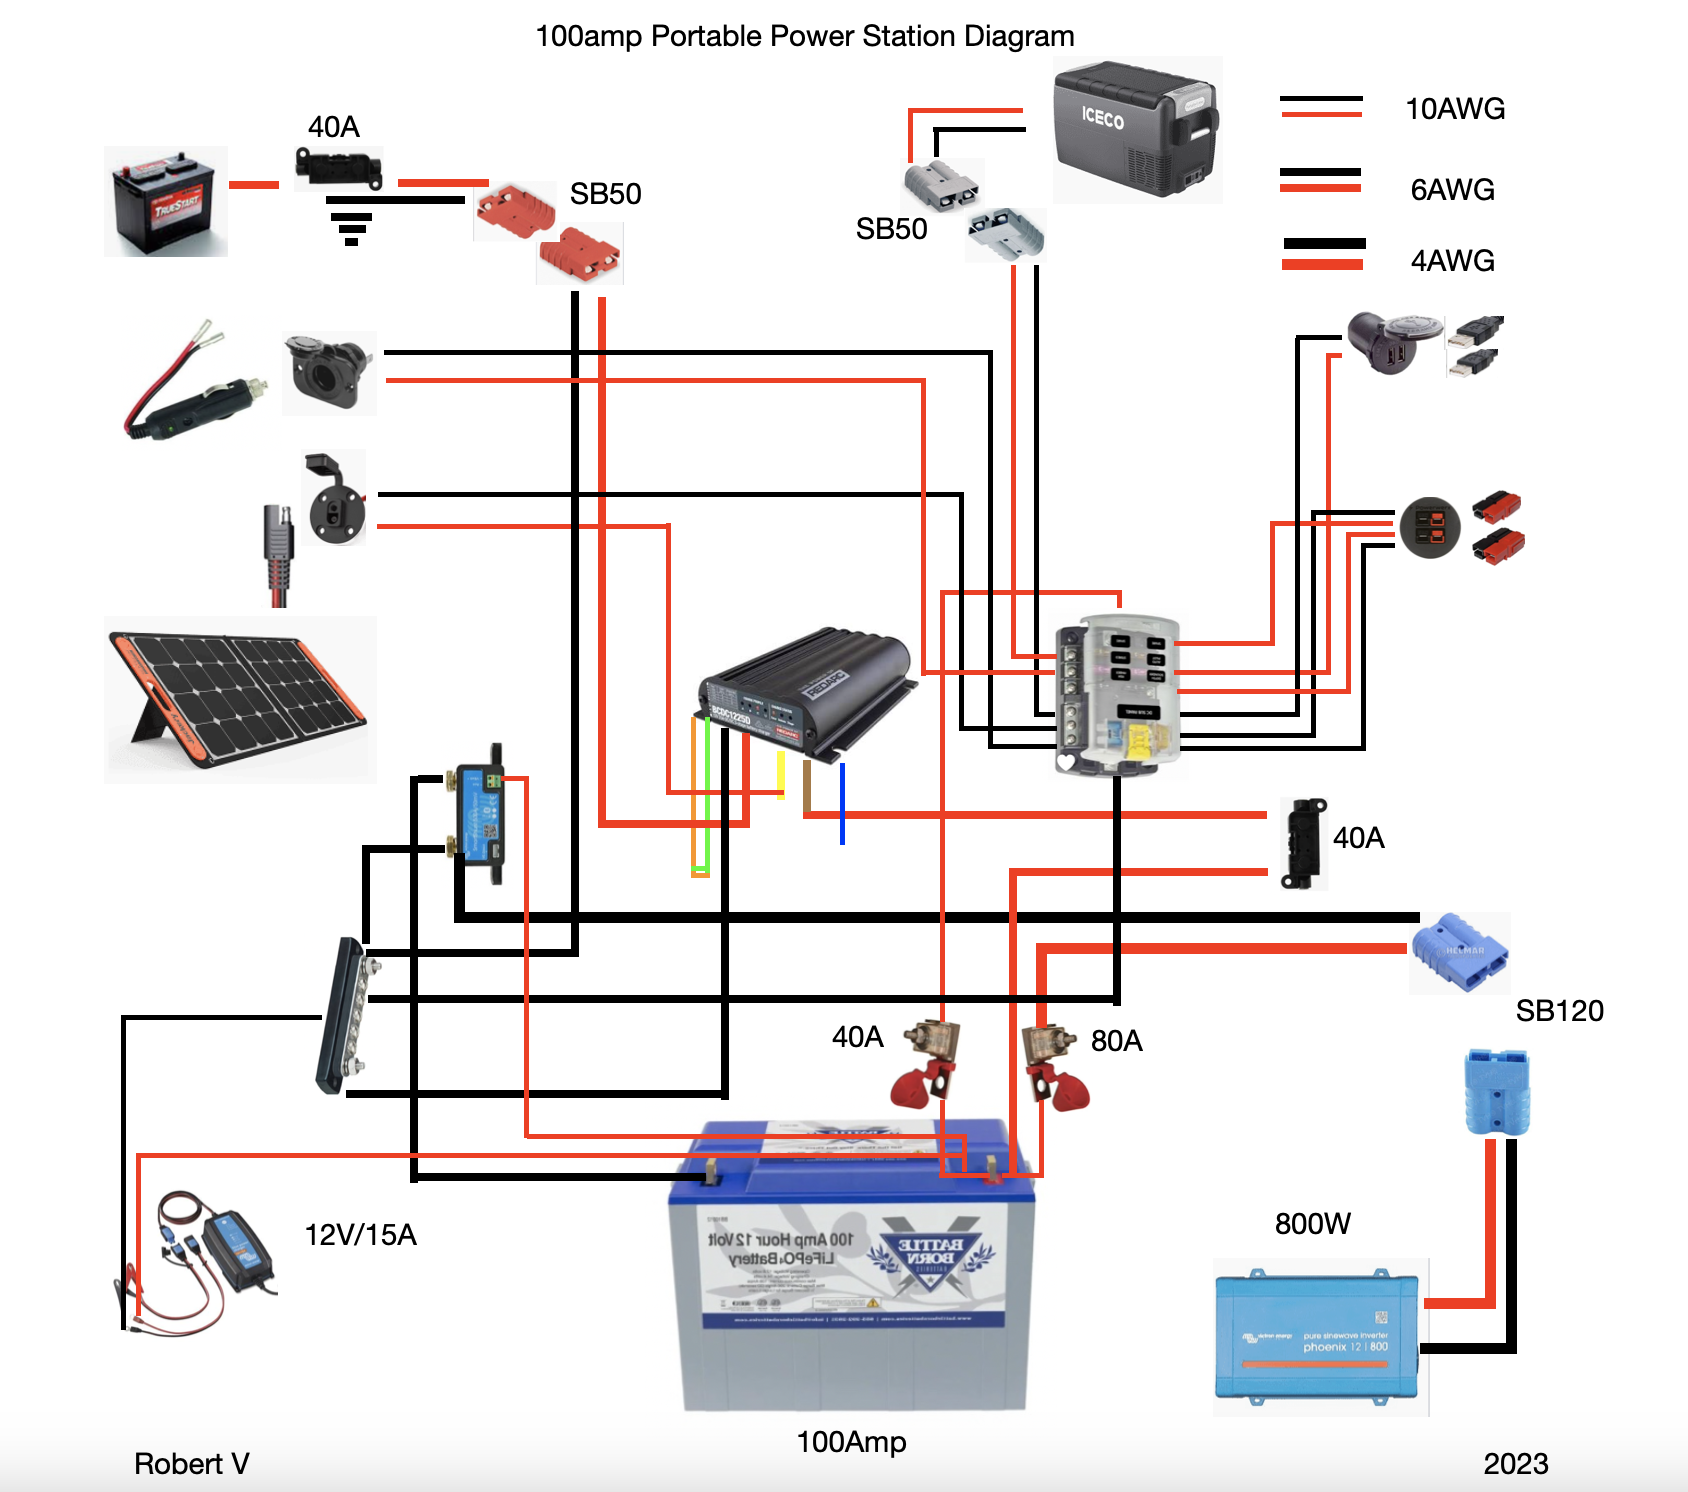 100amp Portable Power Station Diagram.png